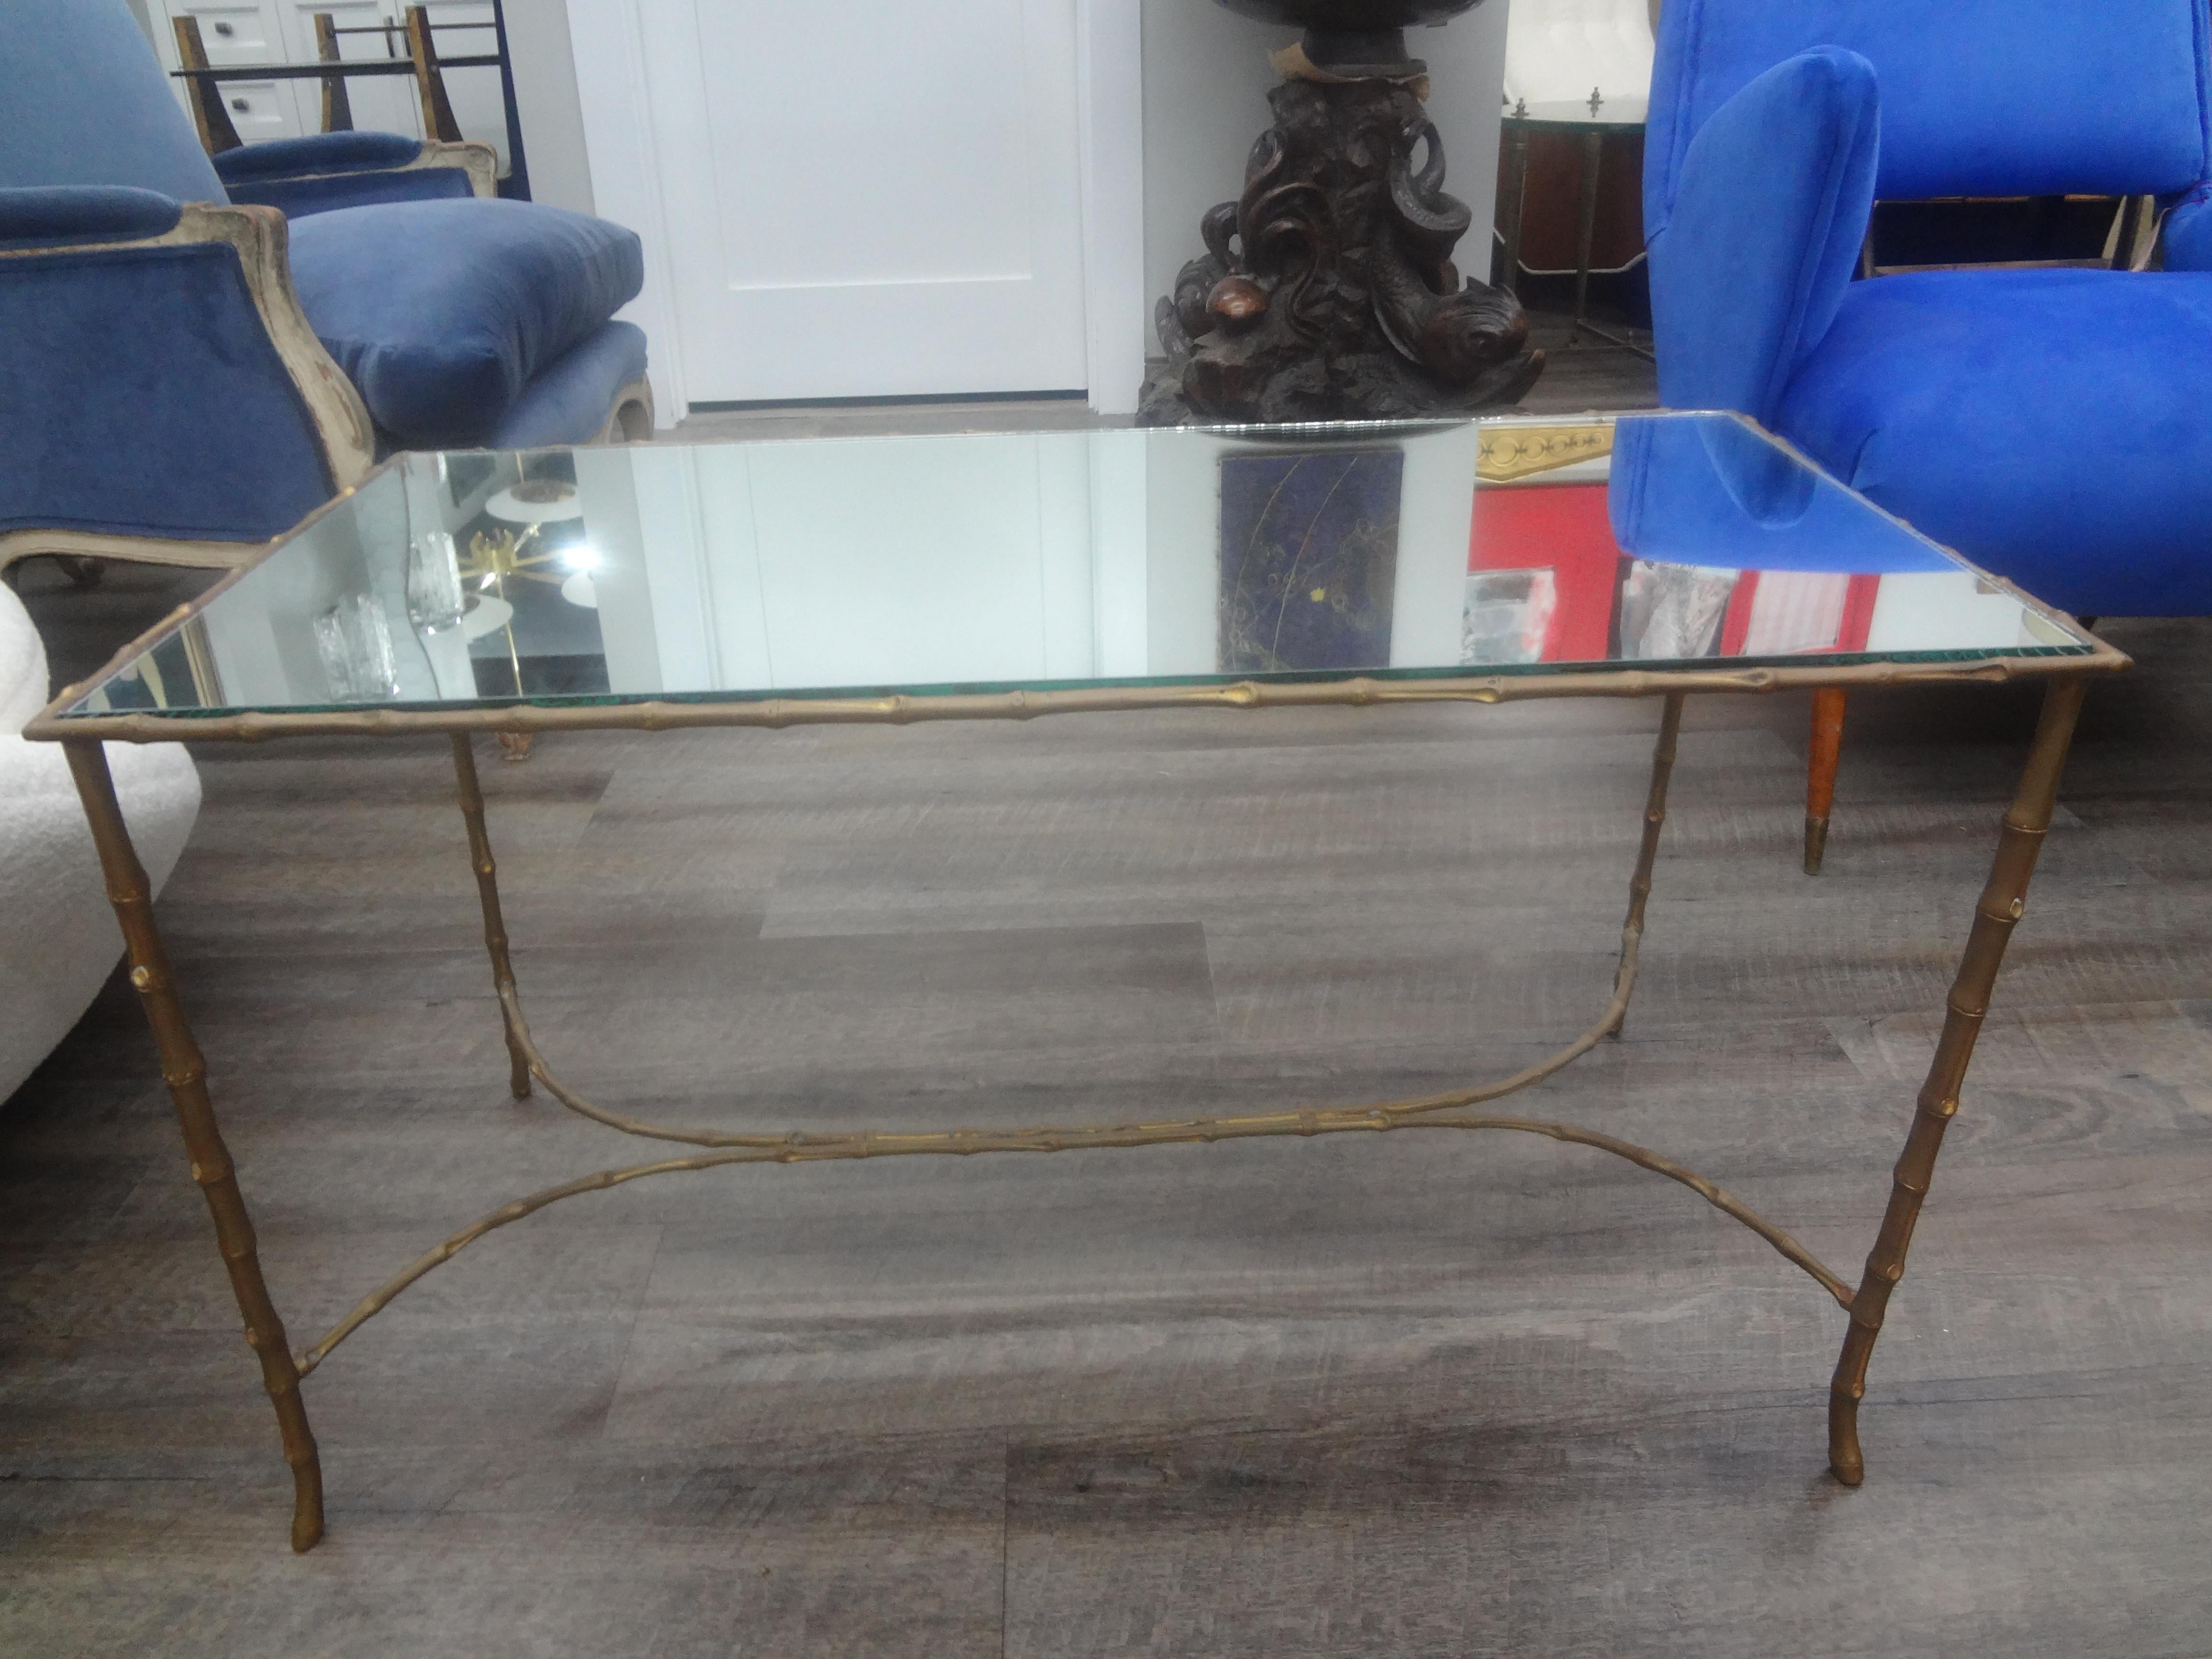 French Maison Baguès Bronze And Mirror Coffee Table.
This elegant French Maison Bagues attributed Louis XVI style faux bamboo bronze cocktail table with graceful legs and a mirrored top dates to the 1940's.
Beautifully aged patina to the